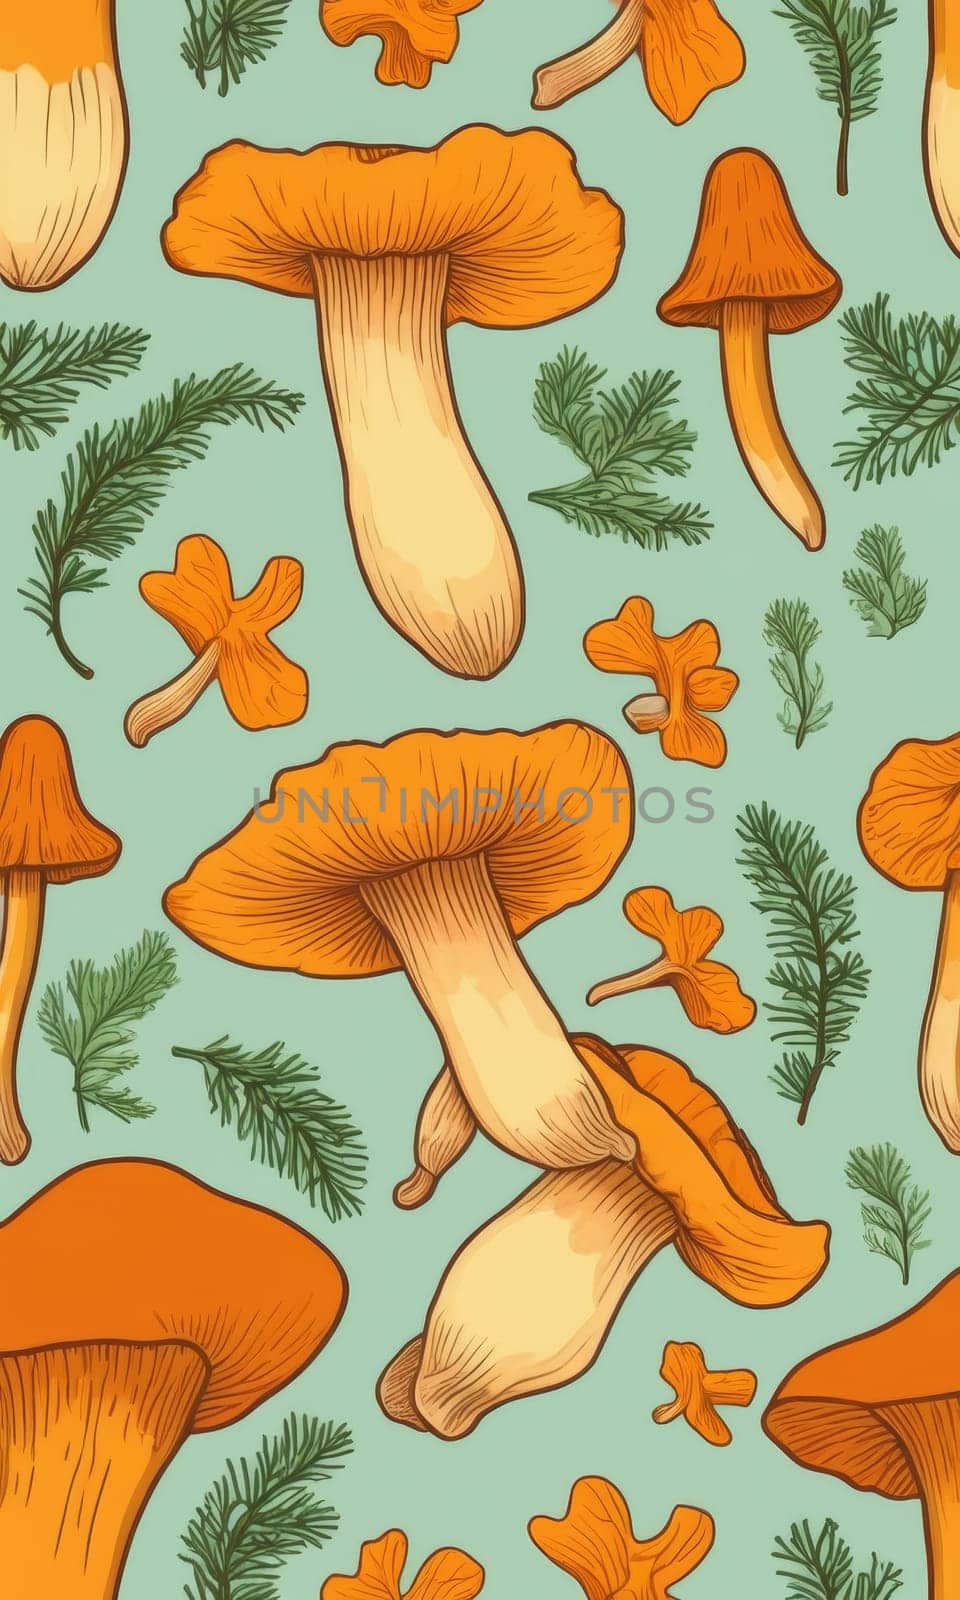 pattern with hand drawn chanterelle mushrooms. by Andre1ns